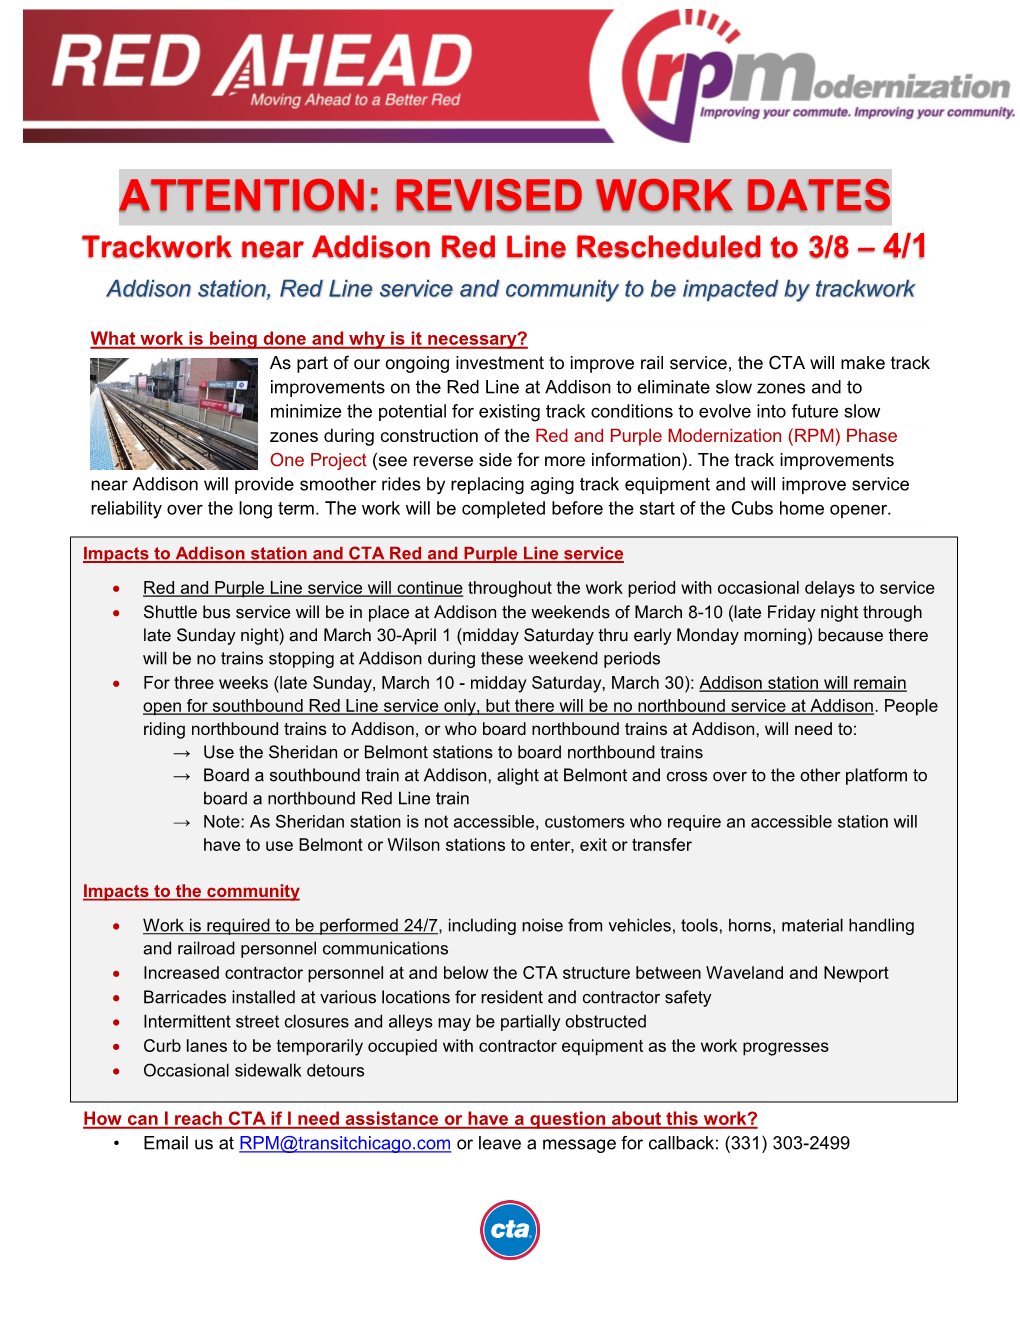 Attention: Revised Work Dates